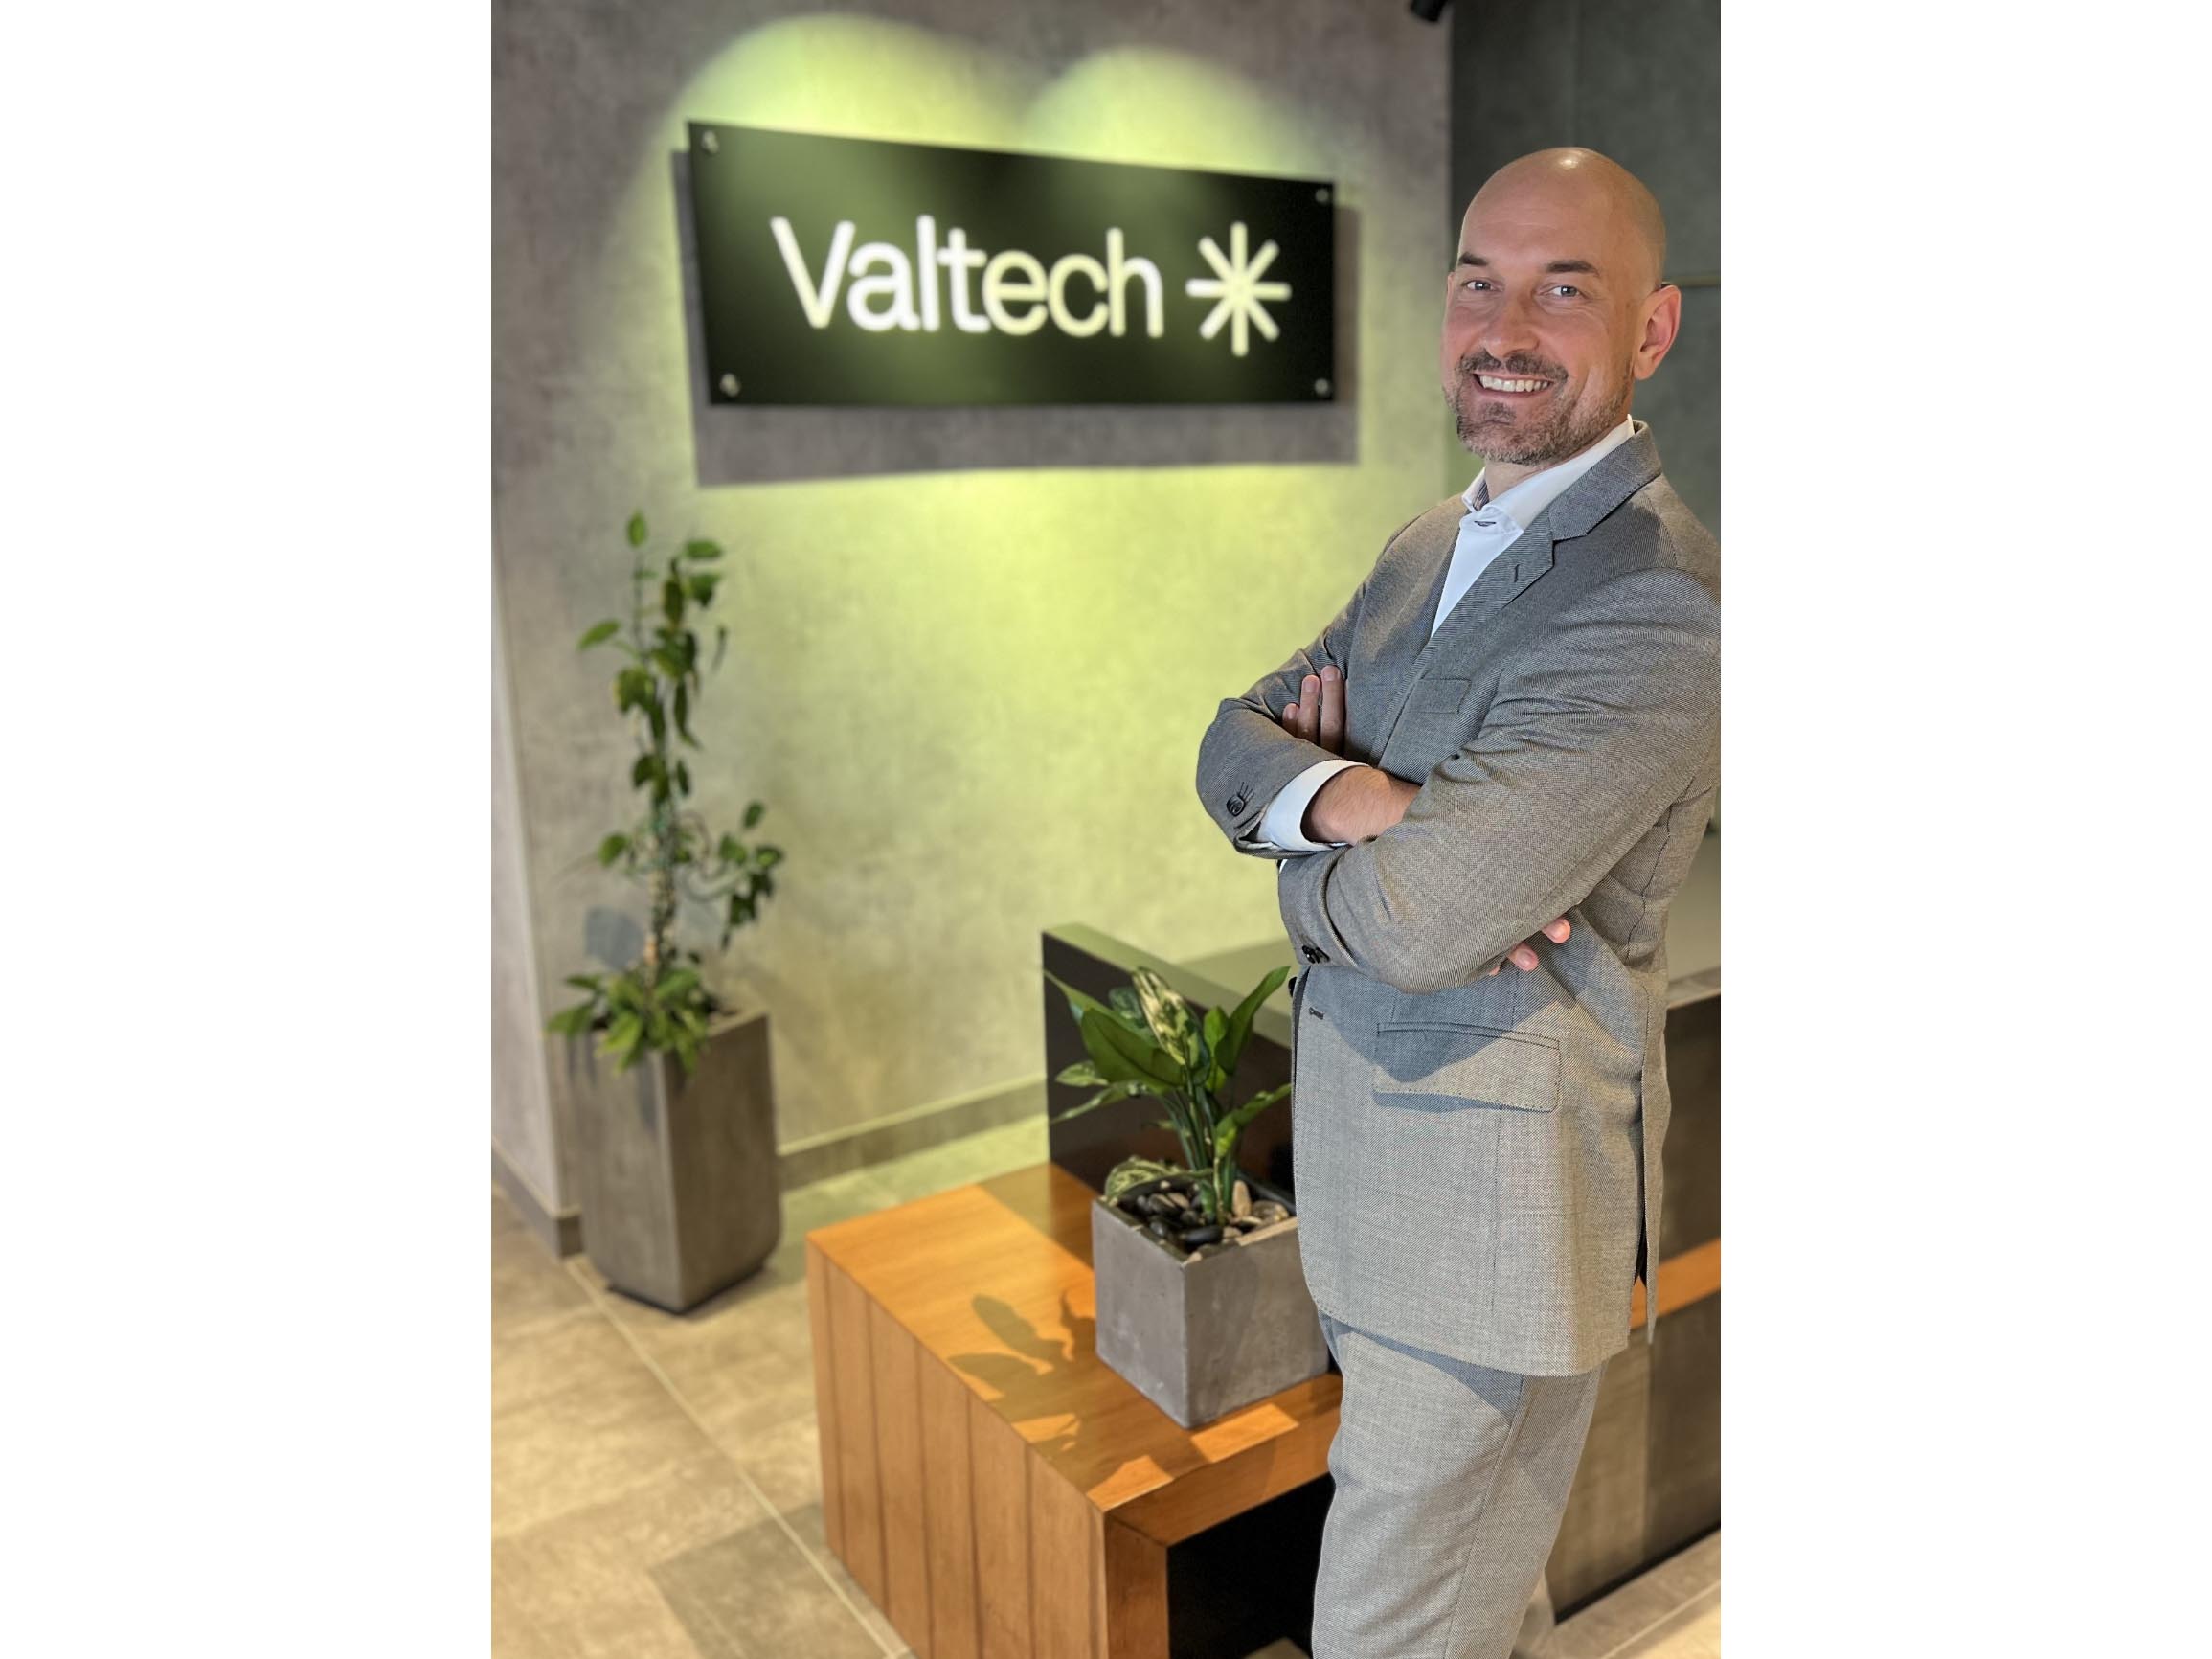 Valtech unveils new brand positioning to cater for enterprises in an experience-driven world